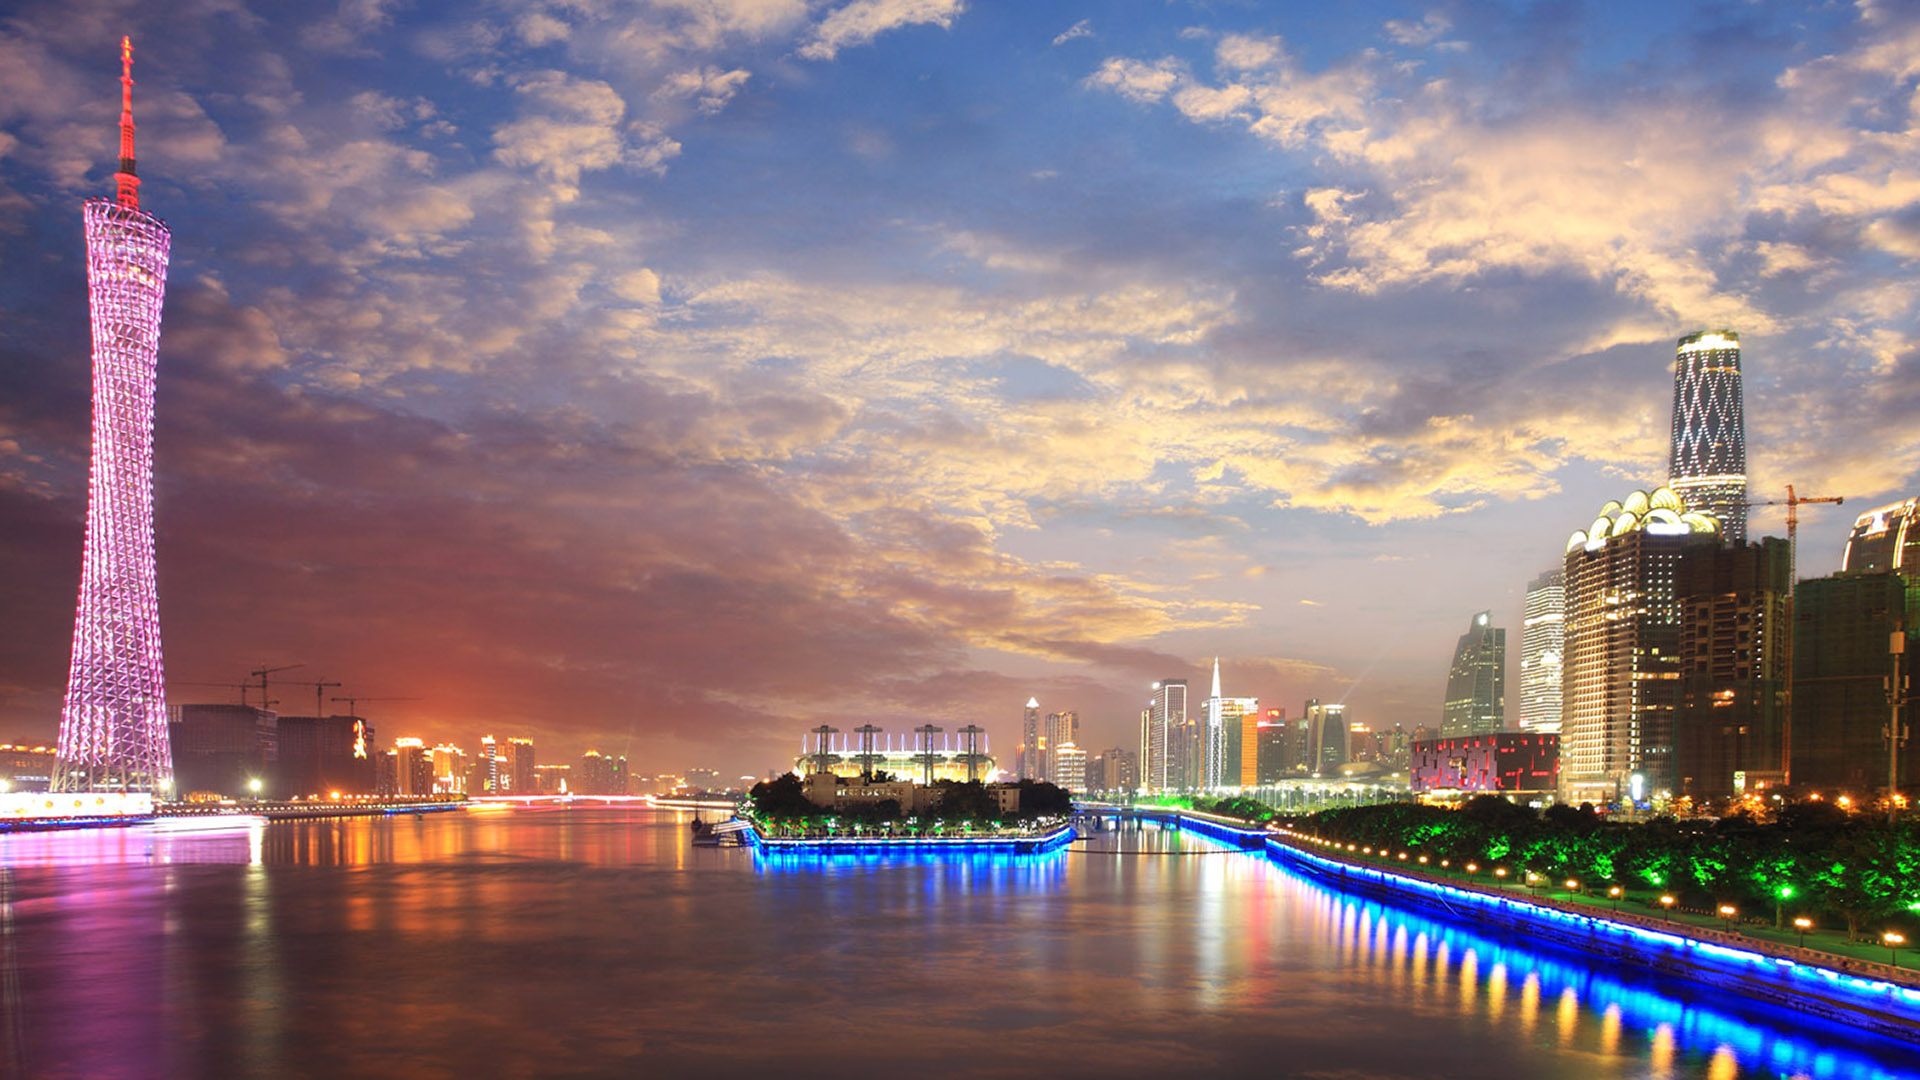 City in china guangzhous at sunset cityscape pearl river night k ultra hd wallpaper for desktop